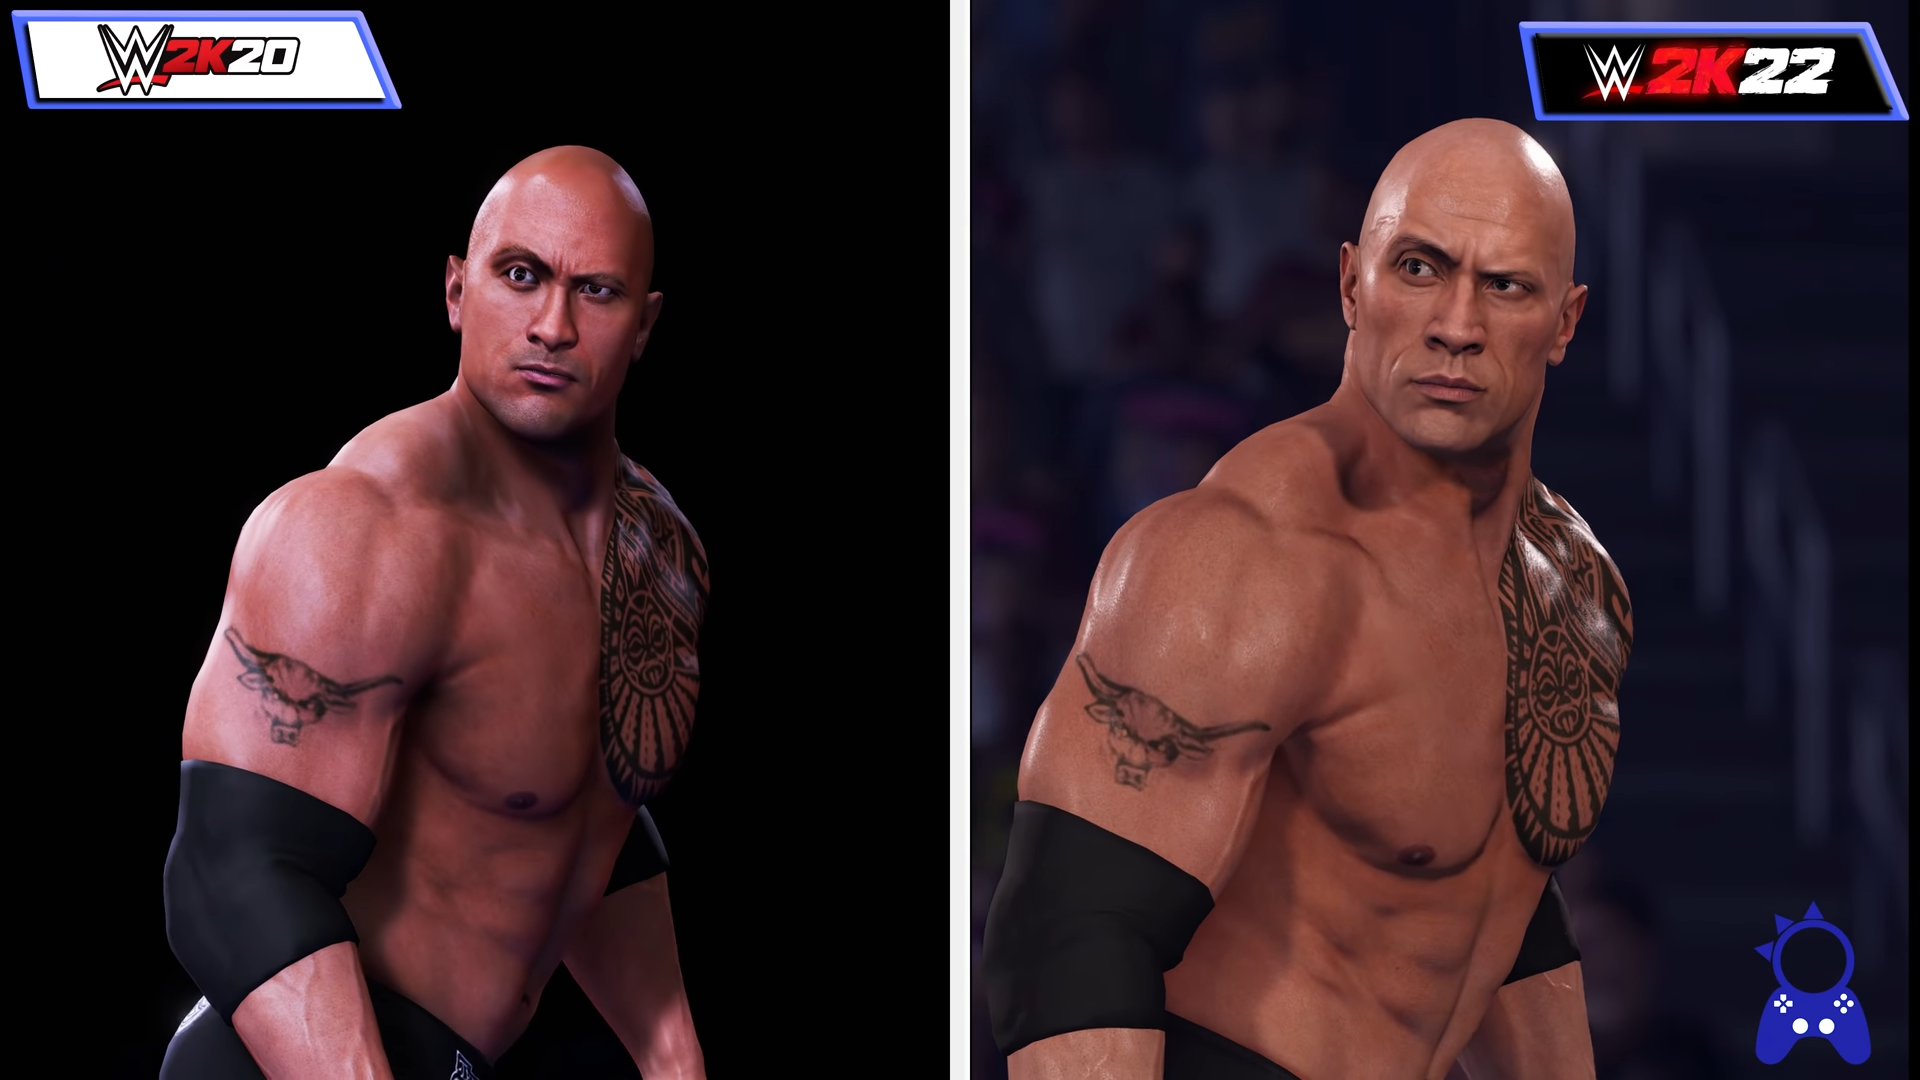 WWE 2K22 Graphics: The Biggest Changes 